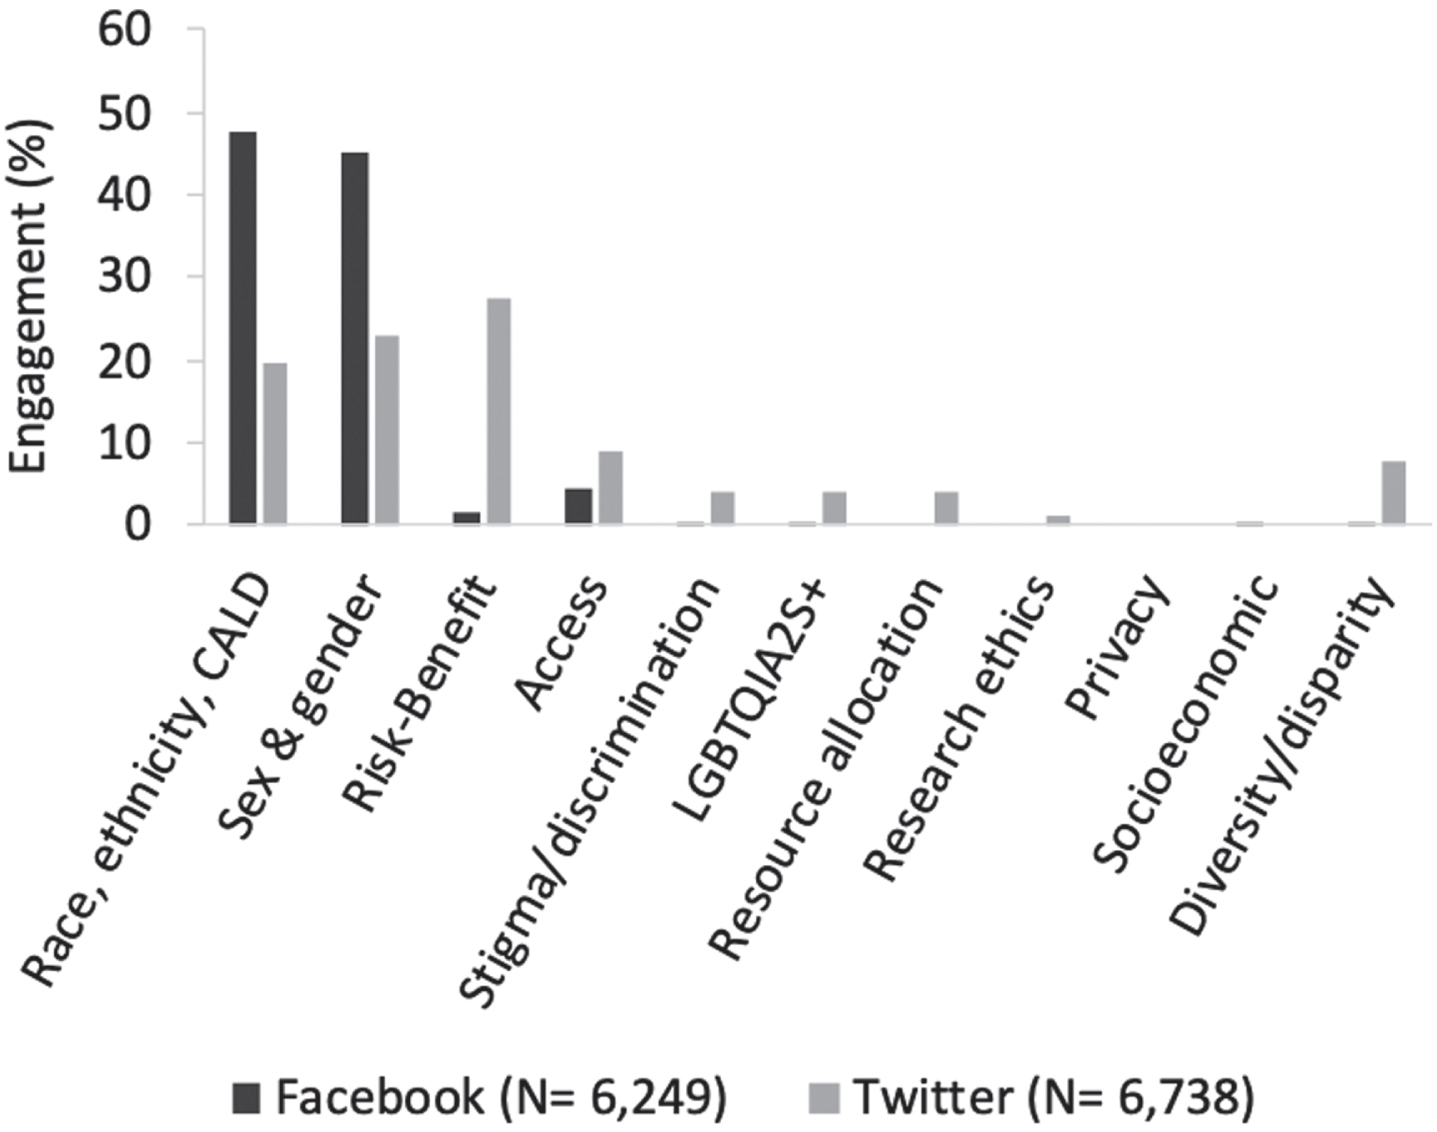 Engagement of ELSI sub-themes. Percentage of social media engagement for ethical, legal, and social issues (ELSI) in dementia research content. Facebook engagement is a sum of reactions, shares, and comments. Twitter engagement is a sum of likes, retweets, replies, and quote tweets. Percentages for each sub-theme are of a total of the N codes indicated for each platform. CALD, cultural and linguistic diversity.